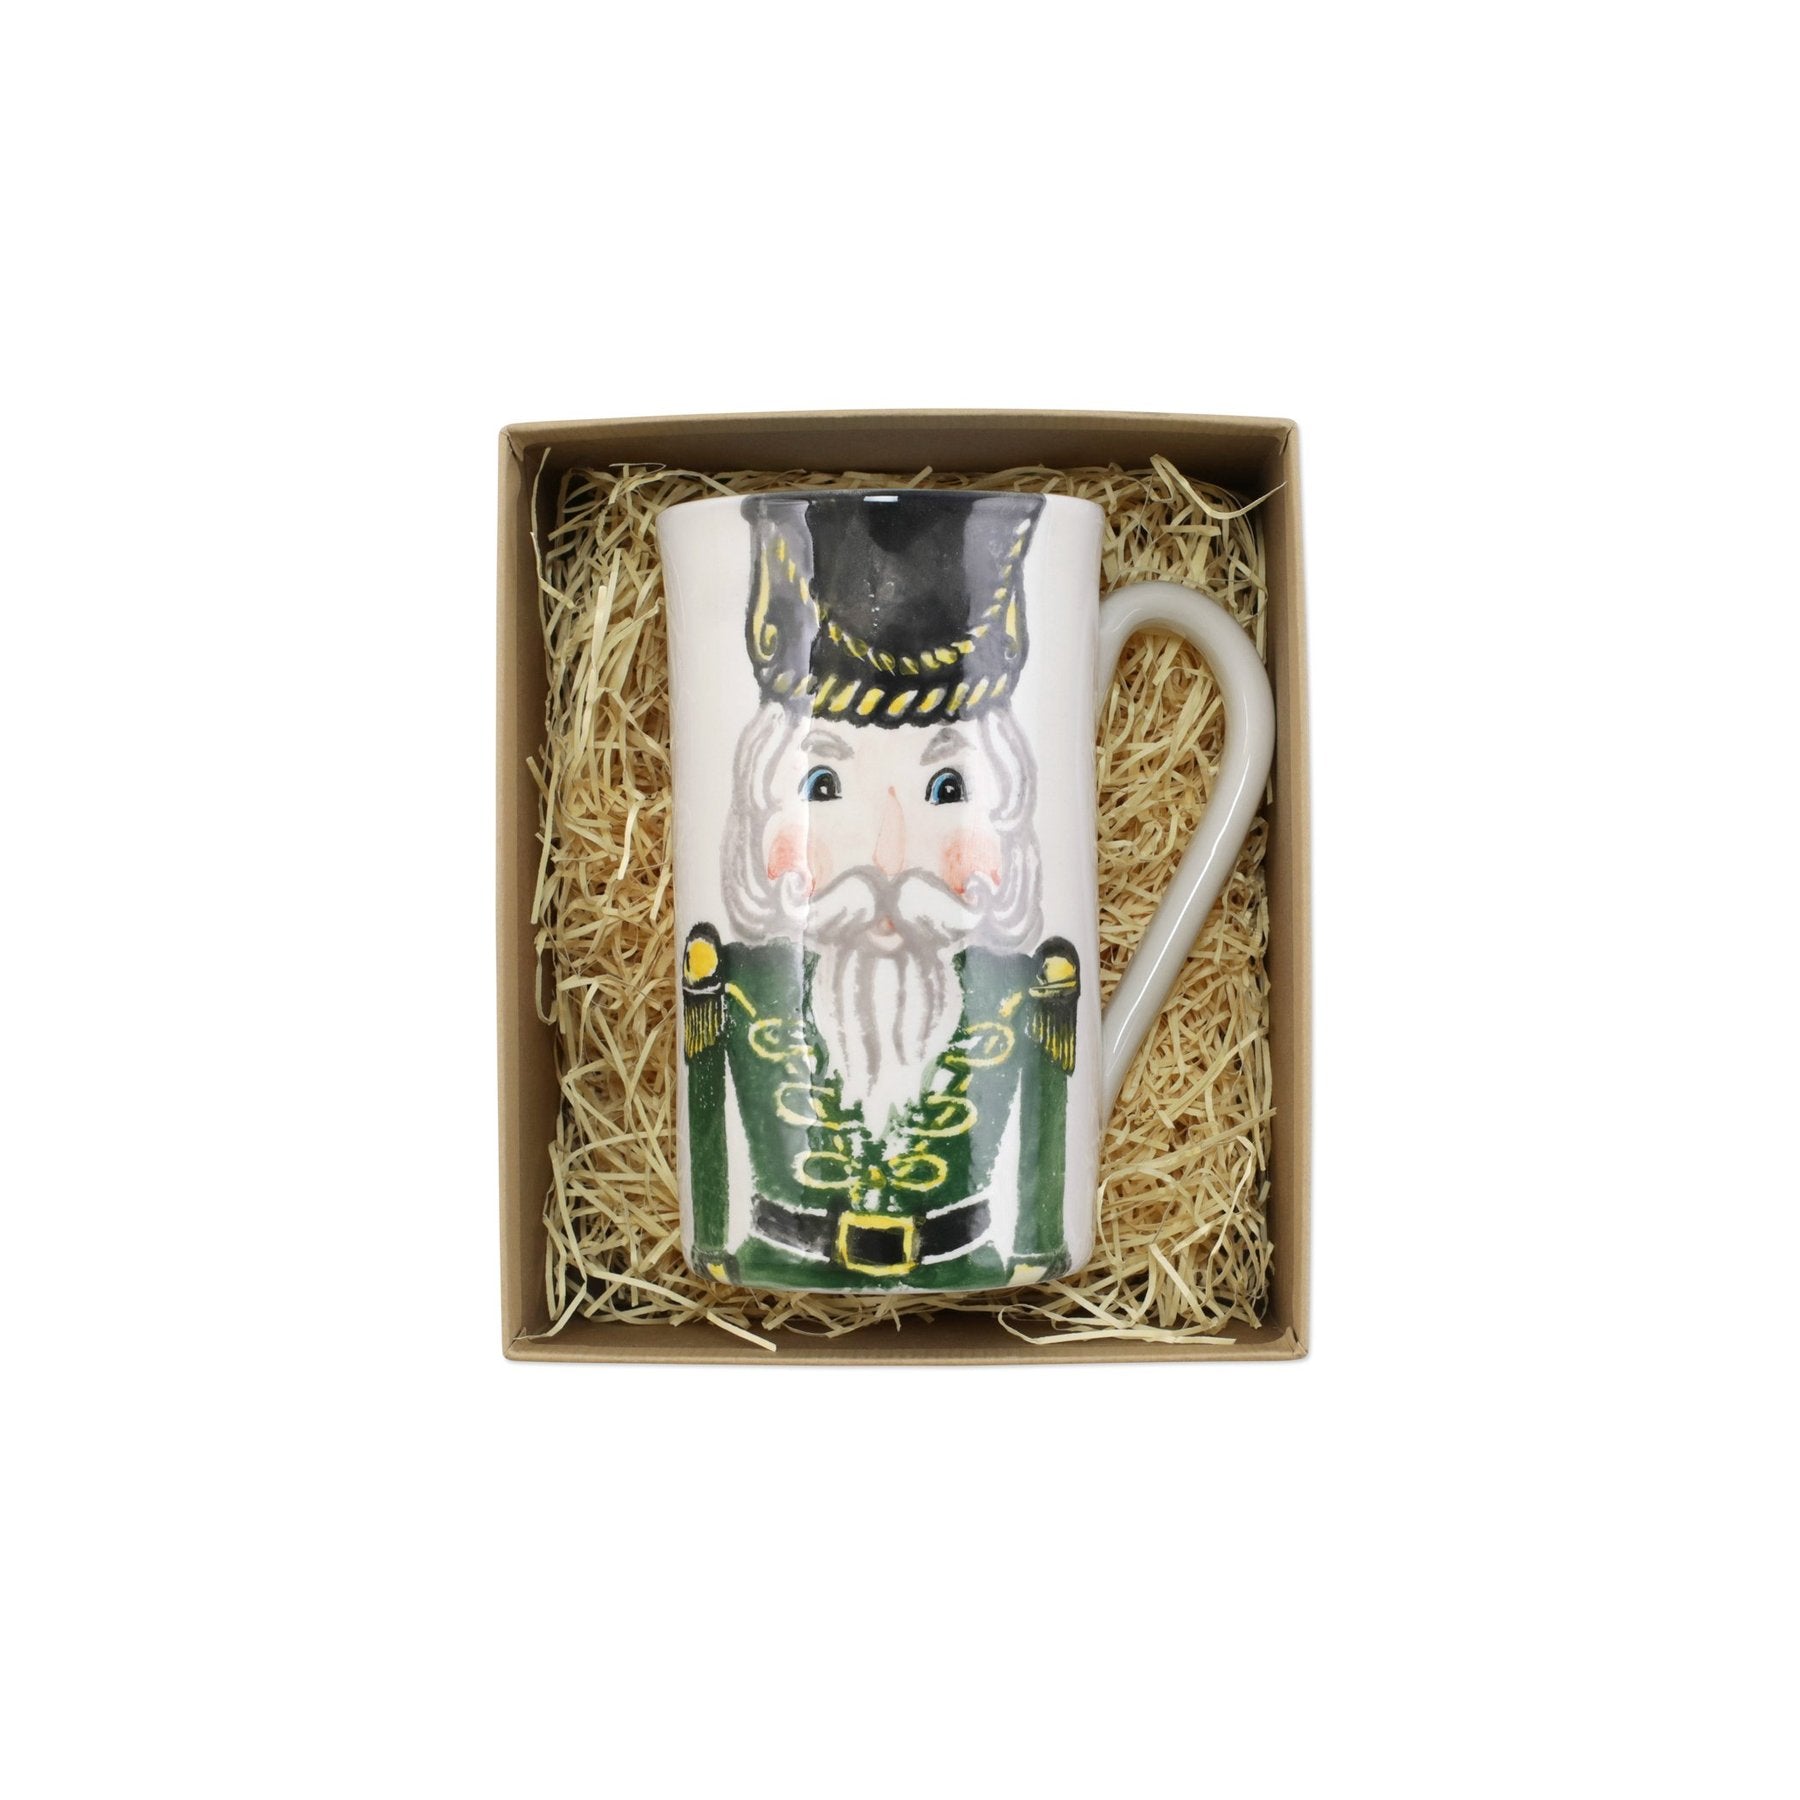 Nutcrackers Latte Mug With Soldier